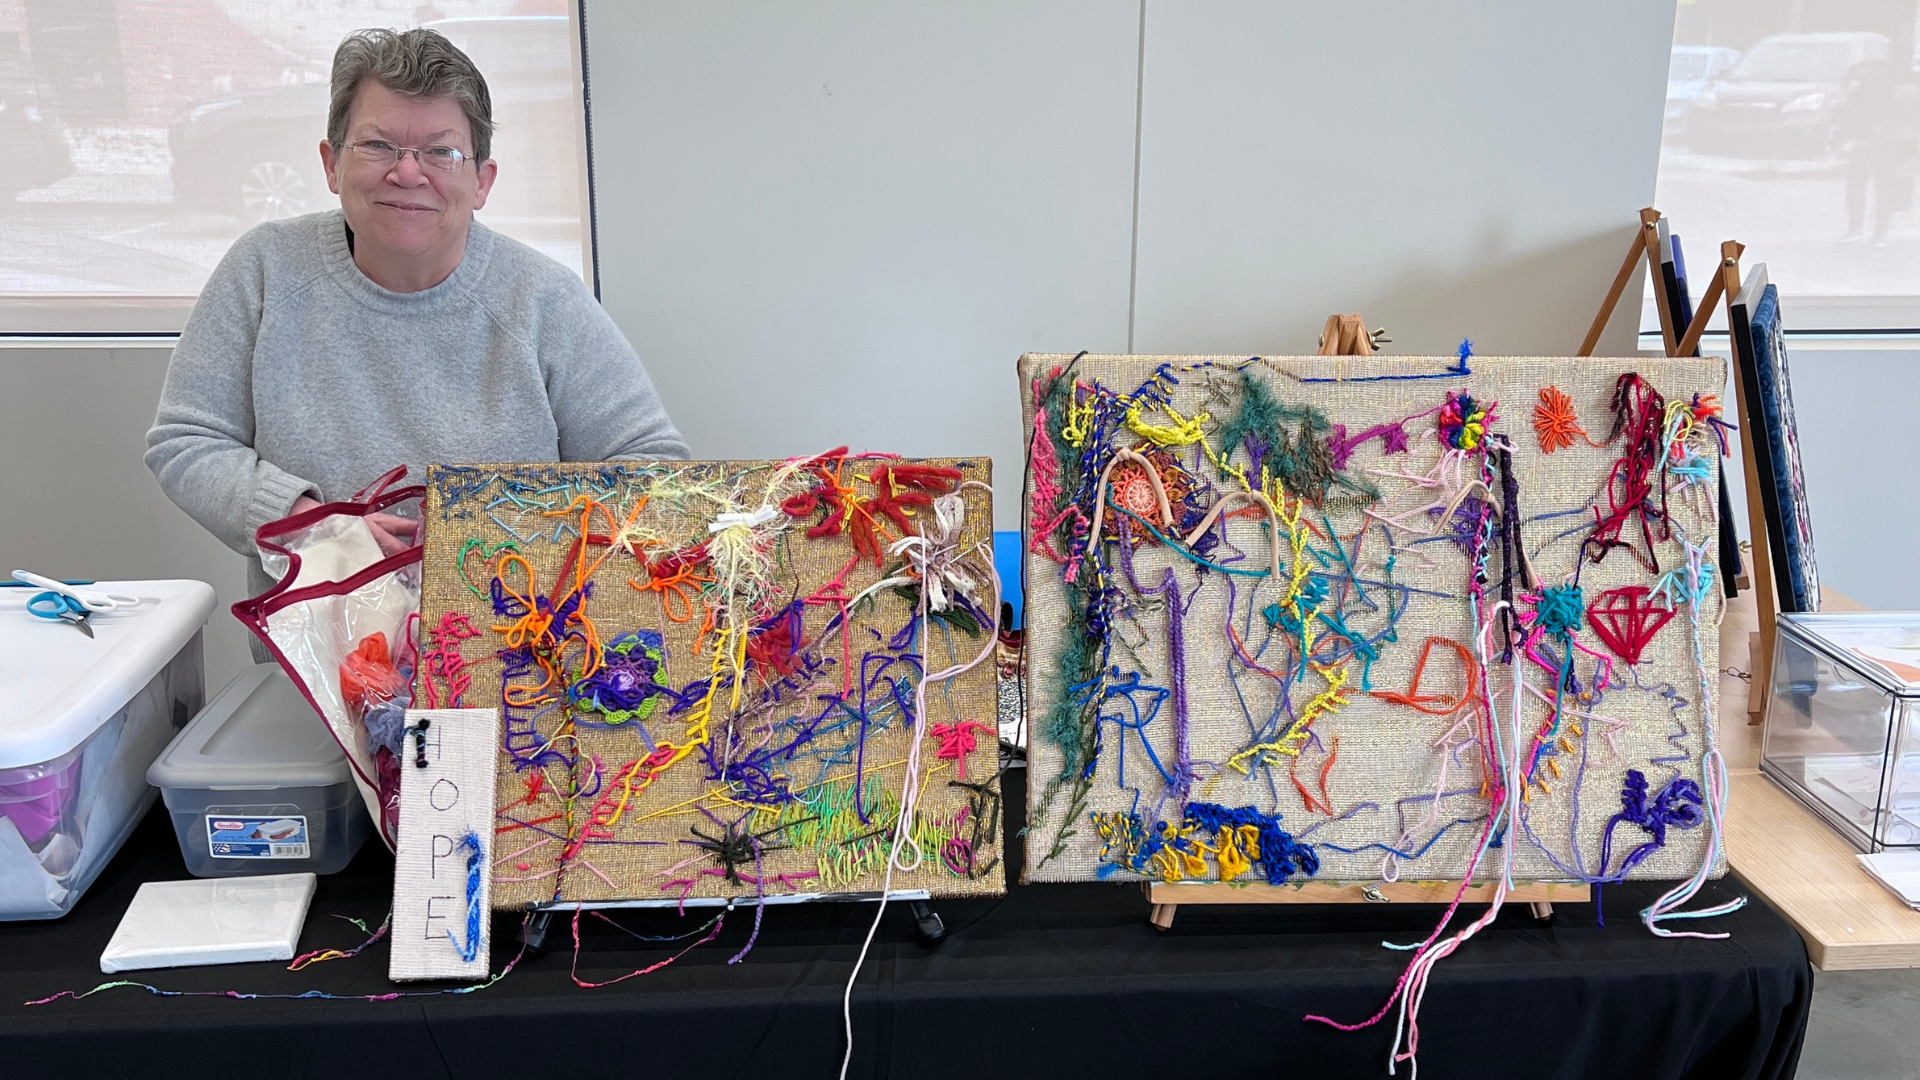 A woman smiling behind a table displaying fiber art that she has created.